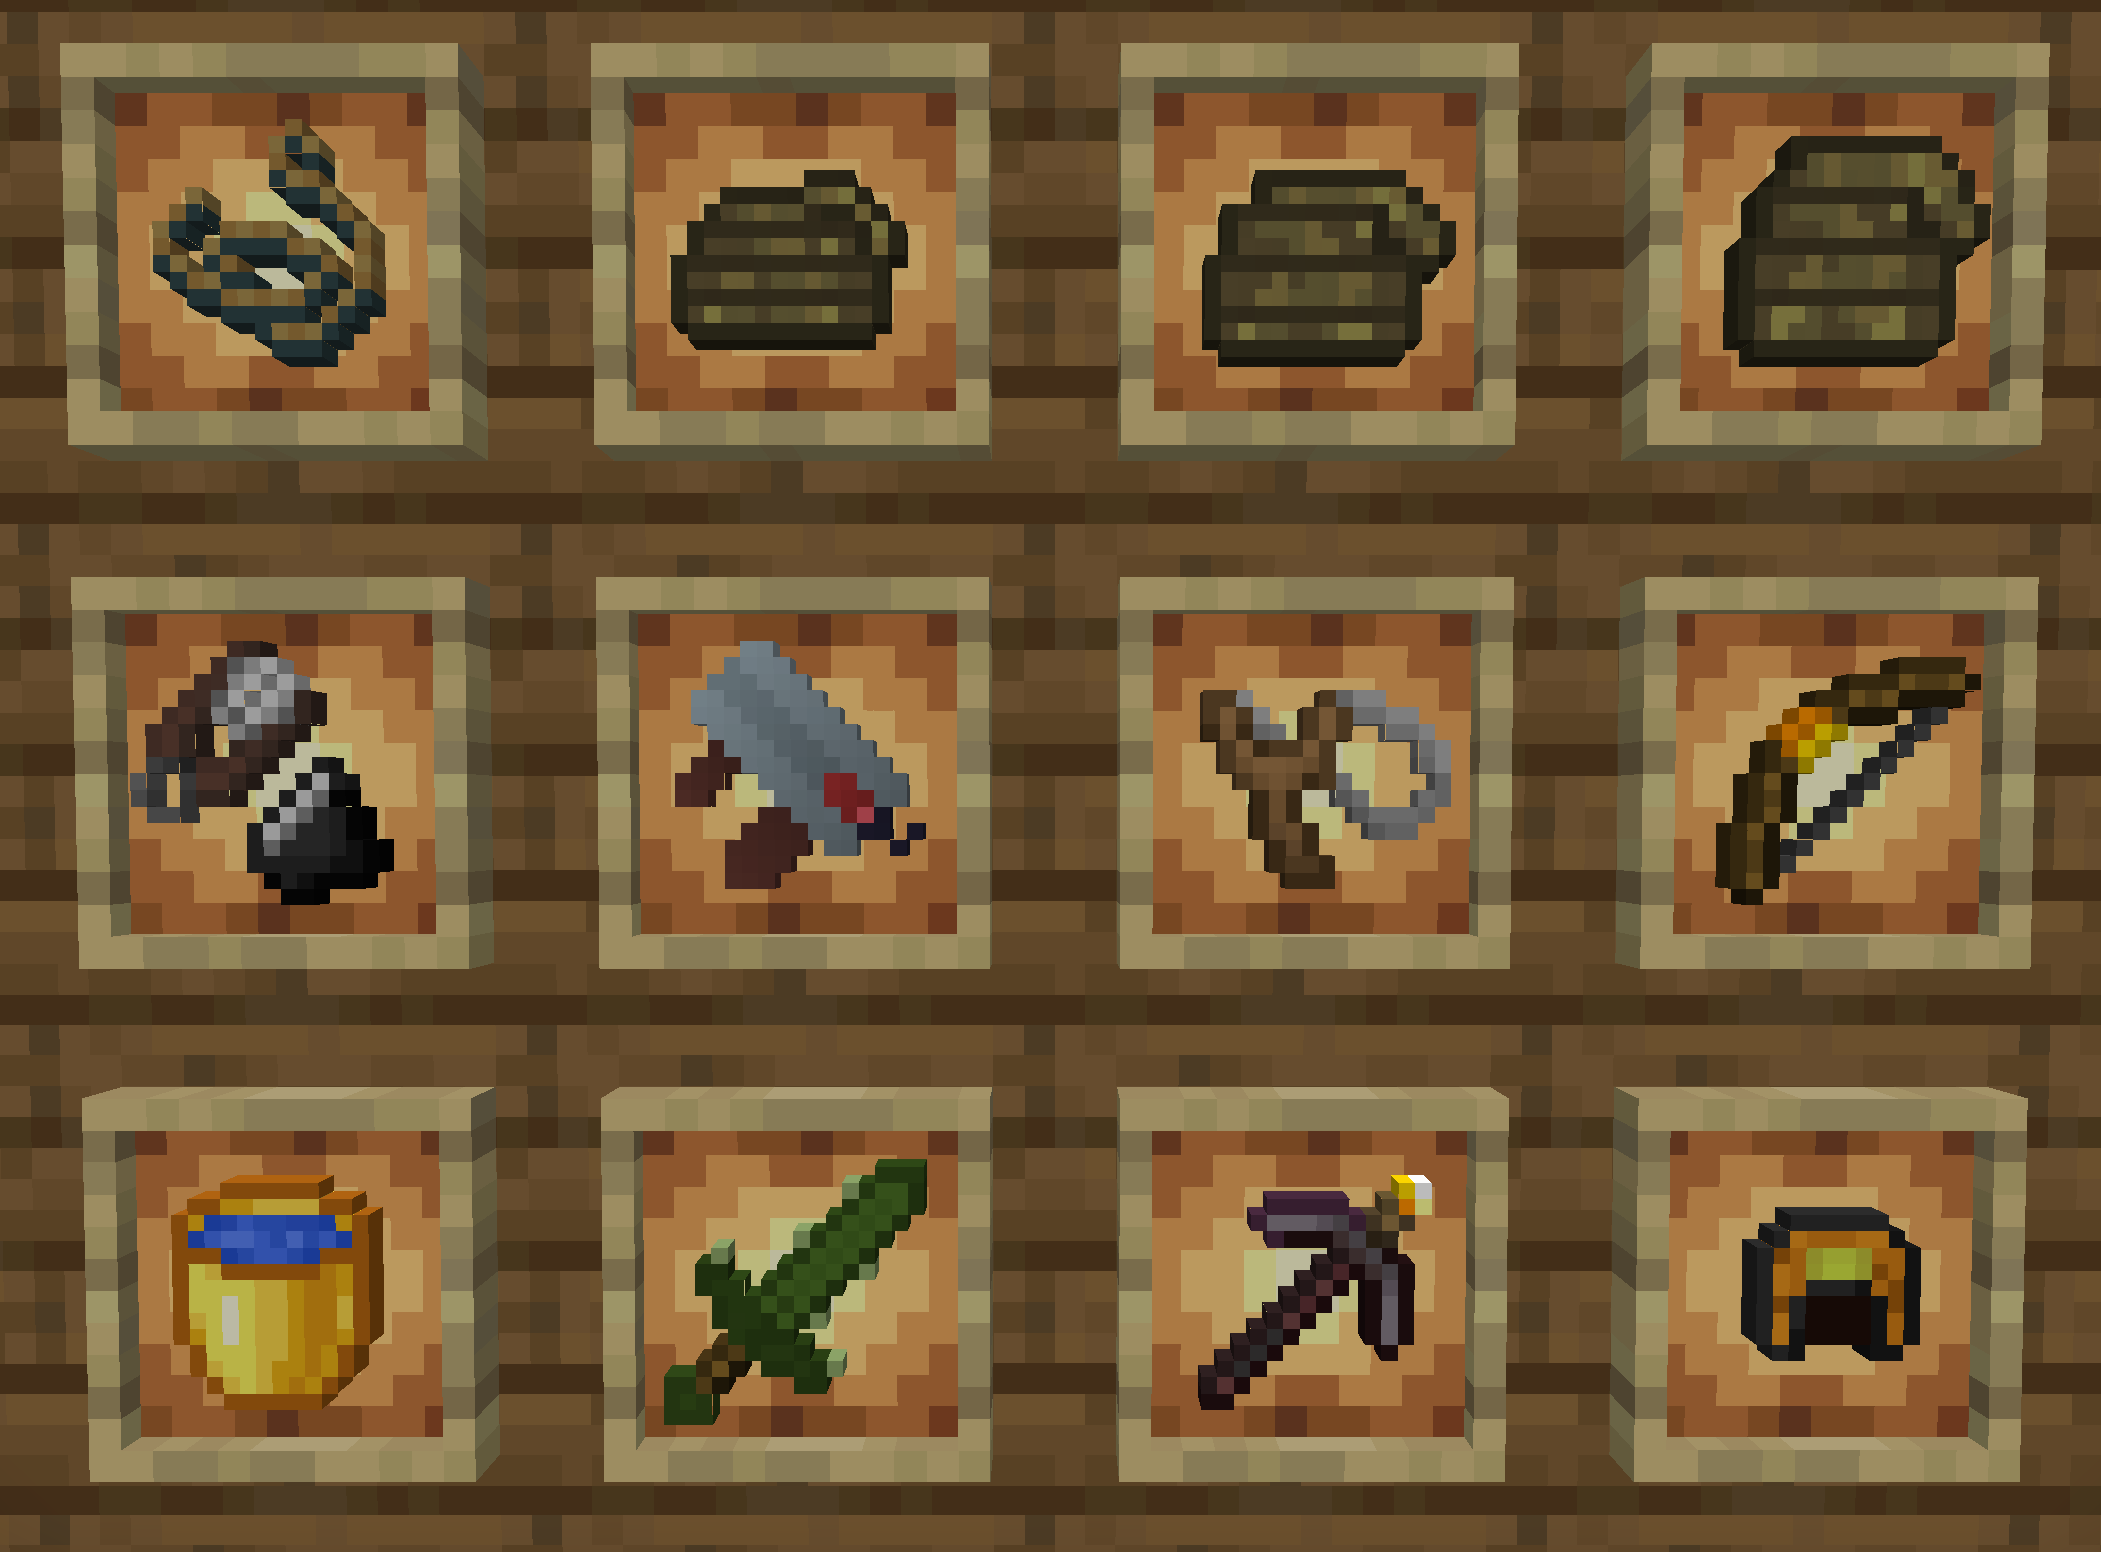 Some of the current items